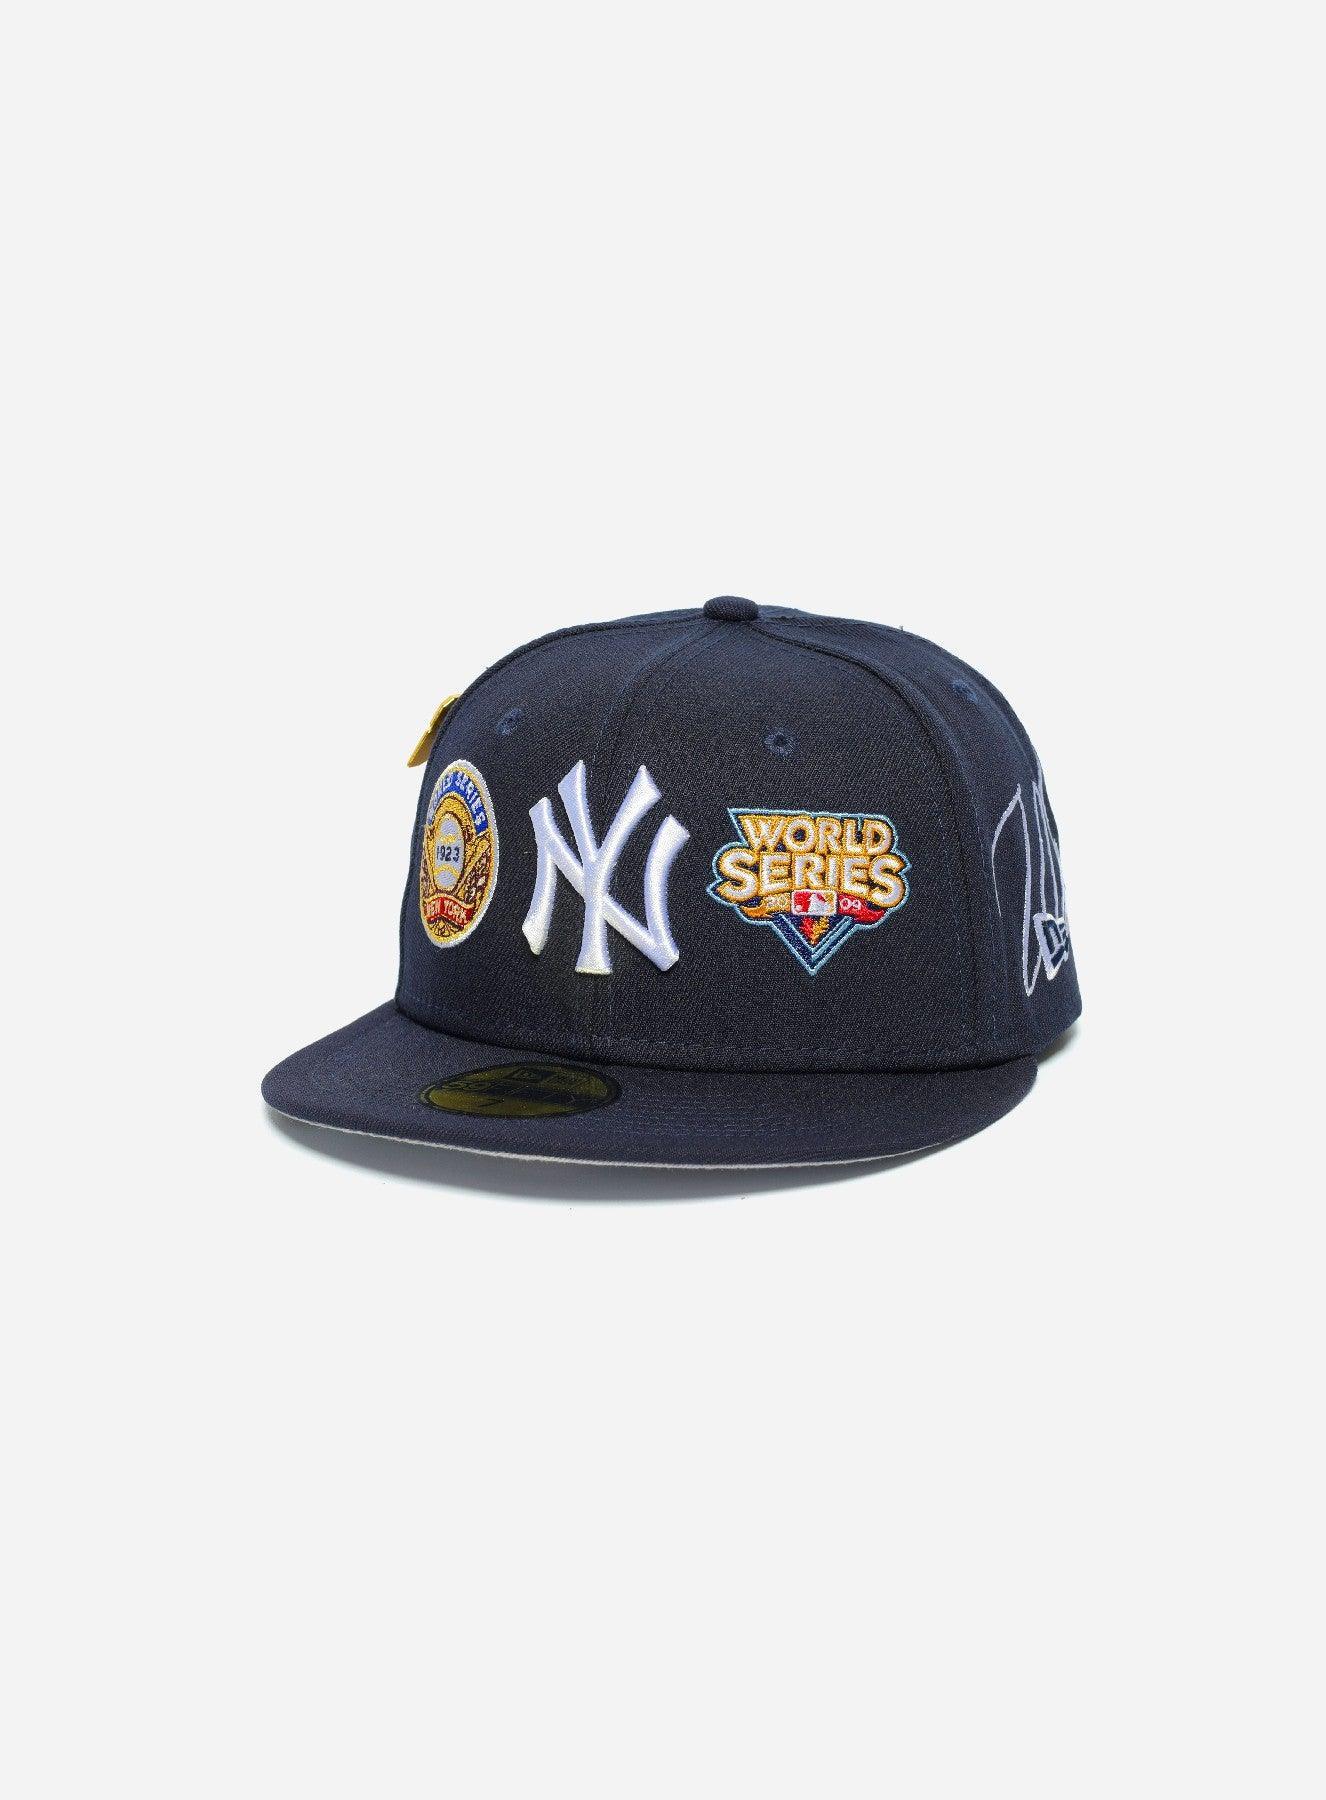 New York Yankees Historic Champs 59Fifty Fitted